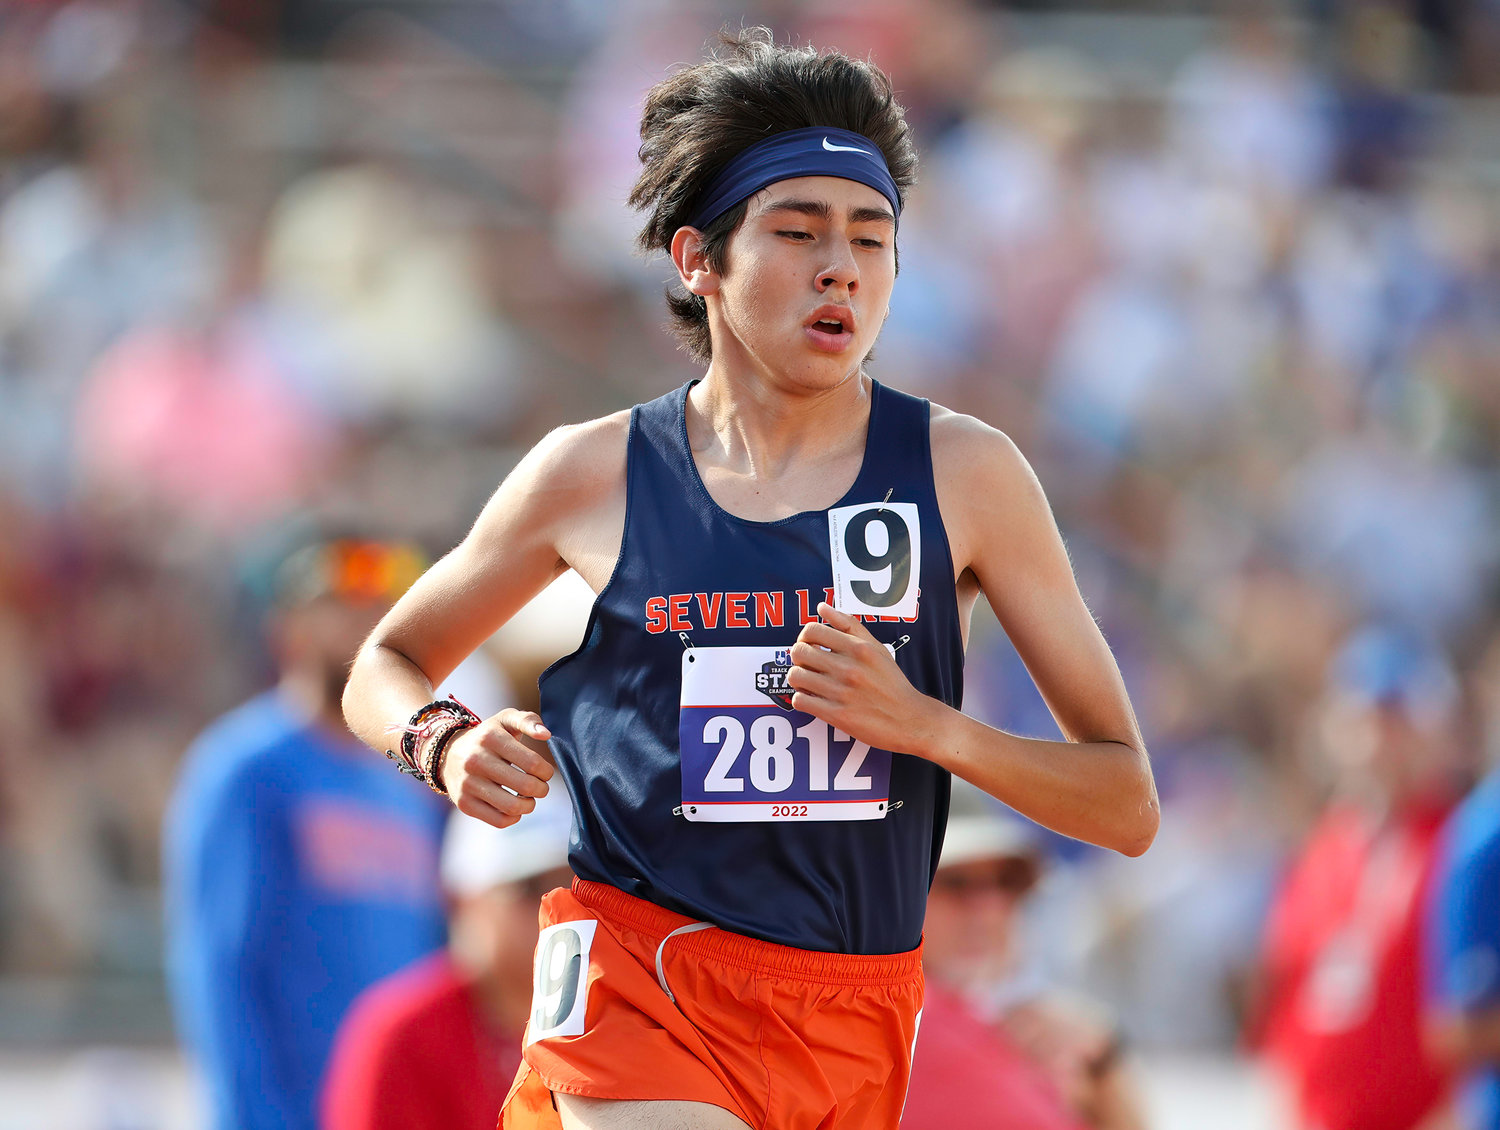 Ruben Rojas of Seven Lakes High School runs in the Class 6A boys 3200-meter run at the UIL State Track and Field Meet on May 14, 2022 in Austin, Texas.